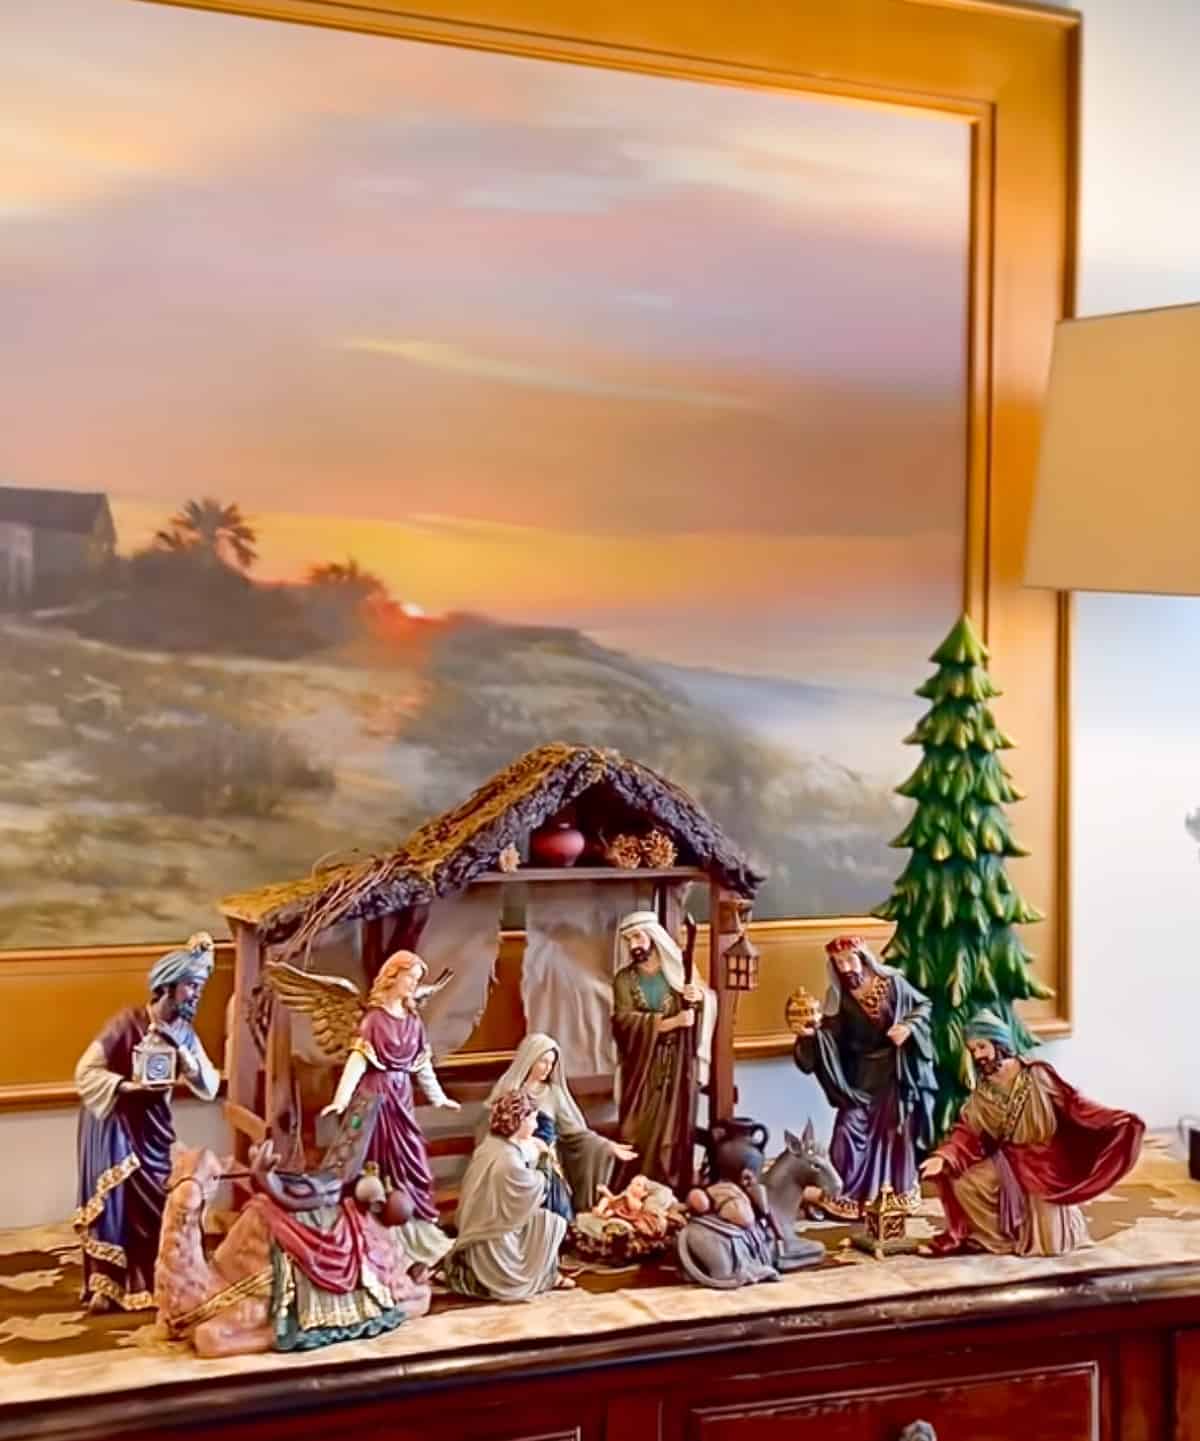 nativity scene on sideboard with artwork hanging on wall above